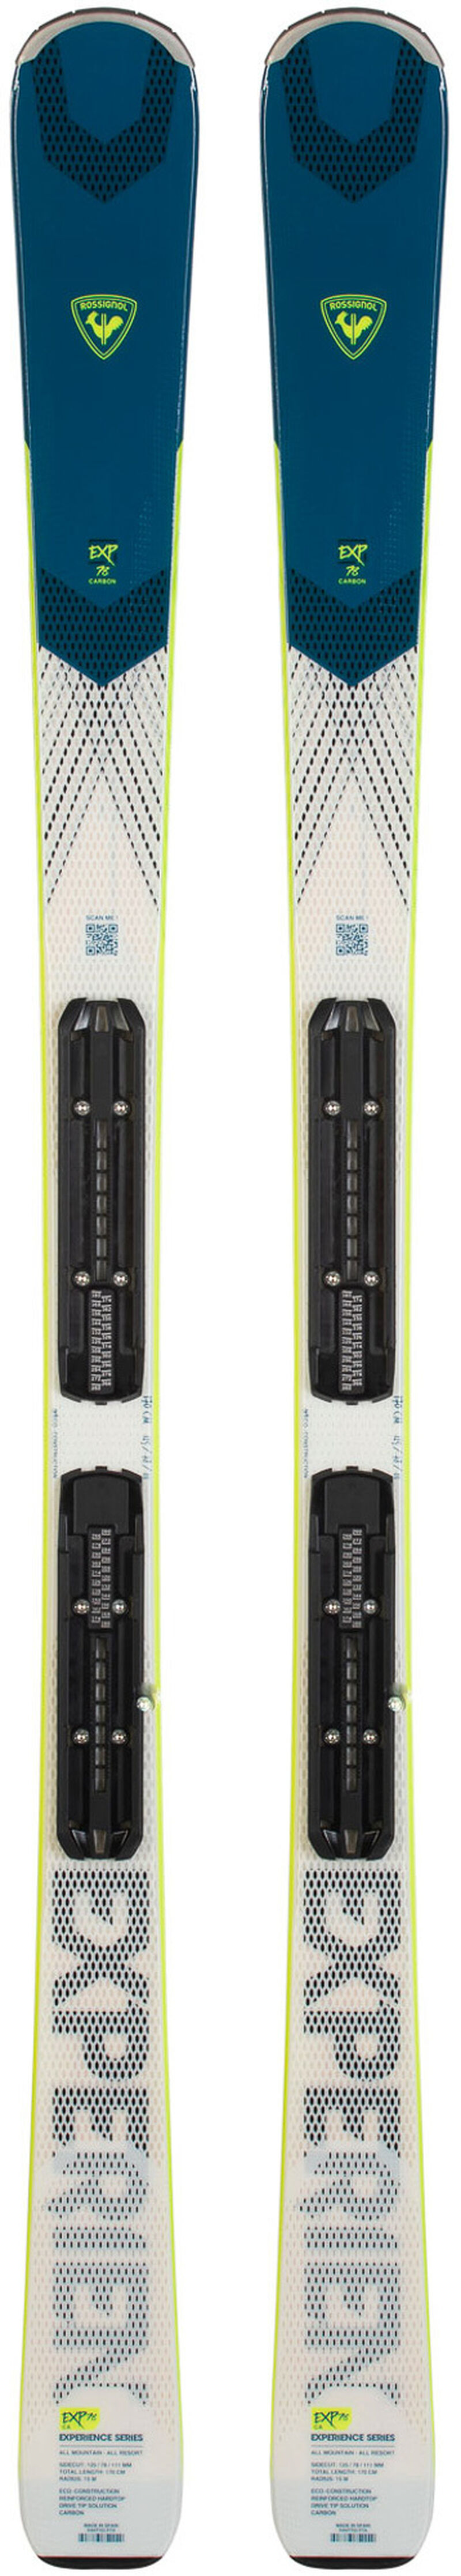 Rossignol Men's ALL MOUNTAIN Skis EXPERIENCE 78 CARBON (XPRESS) Skis